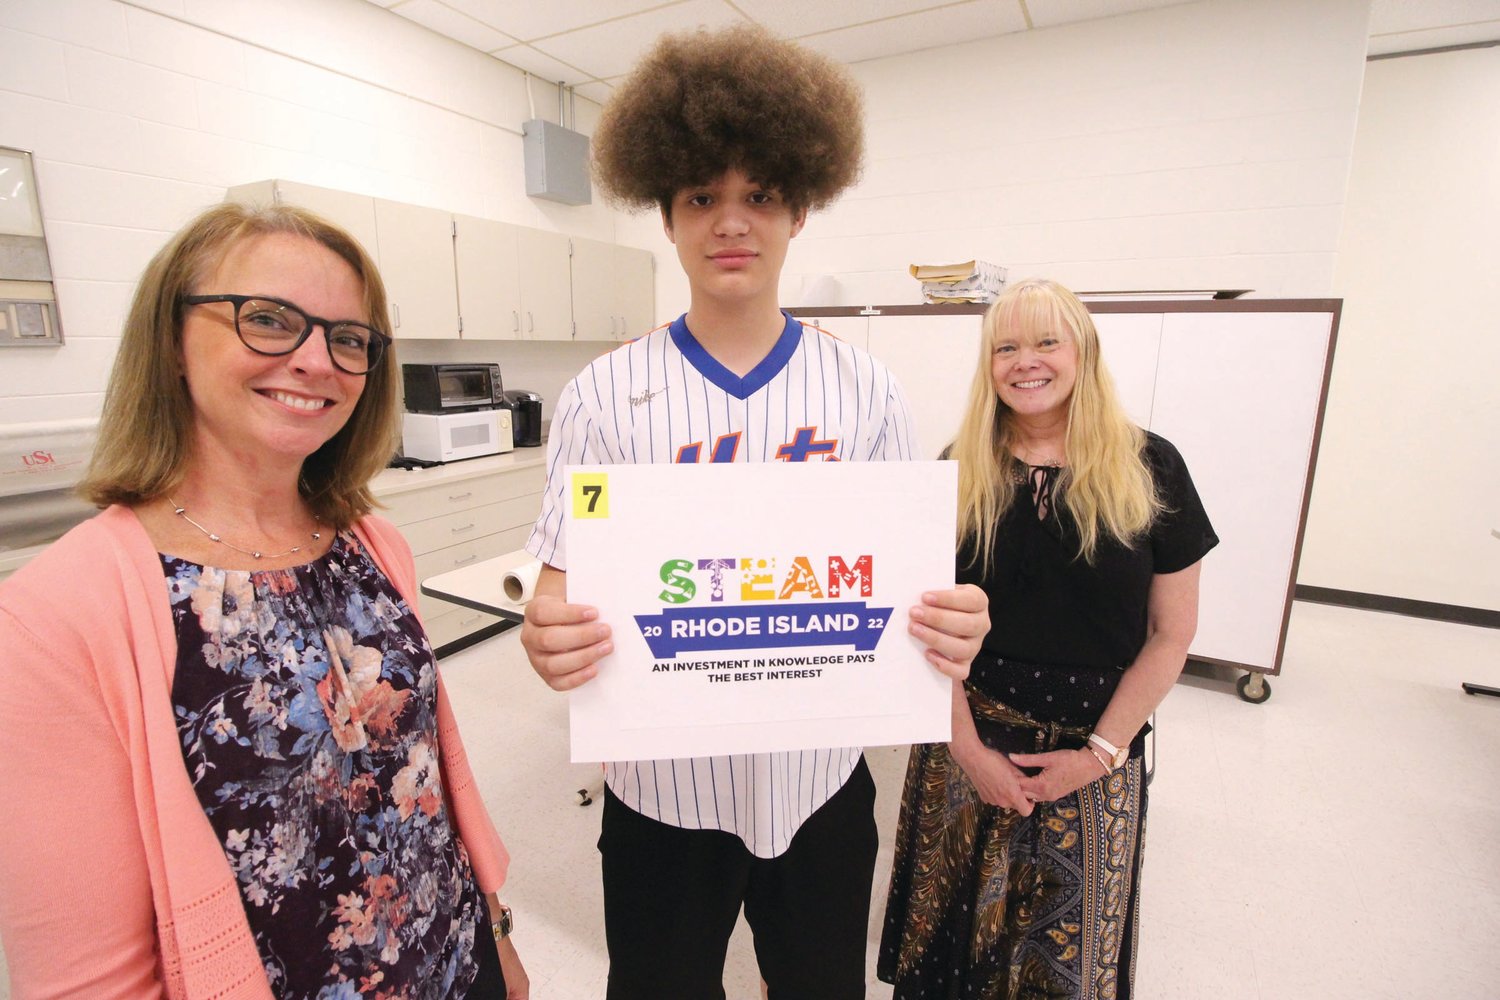 WINNING LOGO: Toll Gate sophomore and Warwick Area Career and Technical Center graphics arts student Jonah Townsend is flanked by Carolyn Higgins, left, STEAM specialist at the office of instruction, assessment and curriculum at the Department of Education and graphics art teacher Jann Rogers-Gartner. Townsend is the winner of the Rhode Island Department of Education STEAM Logo Design Contest. (Warwick Beacon photo)